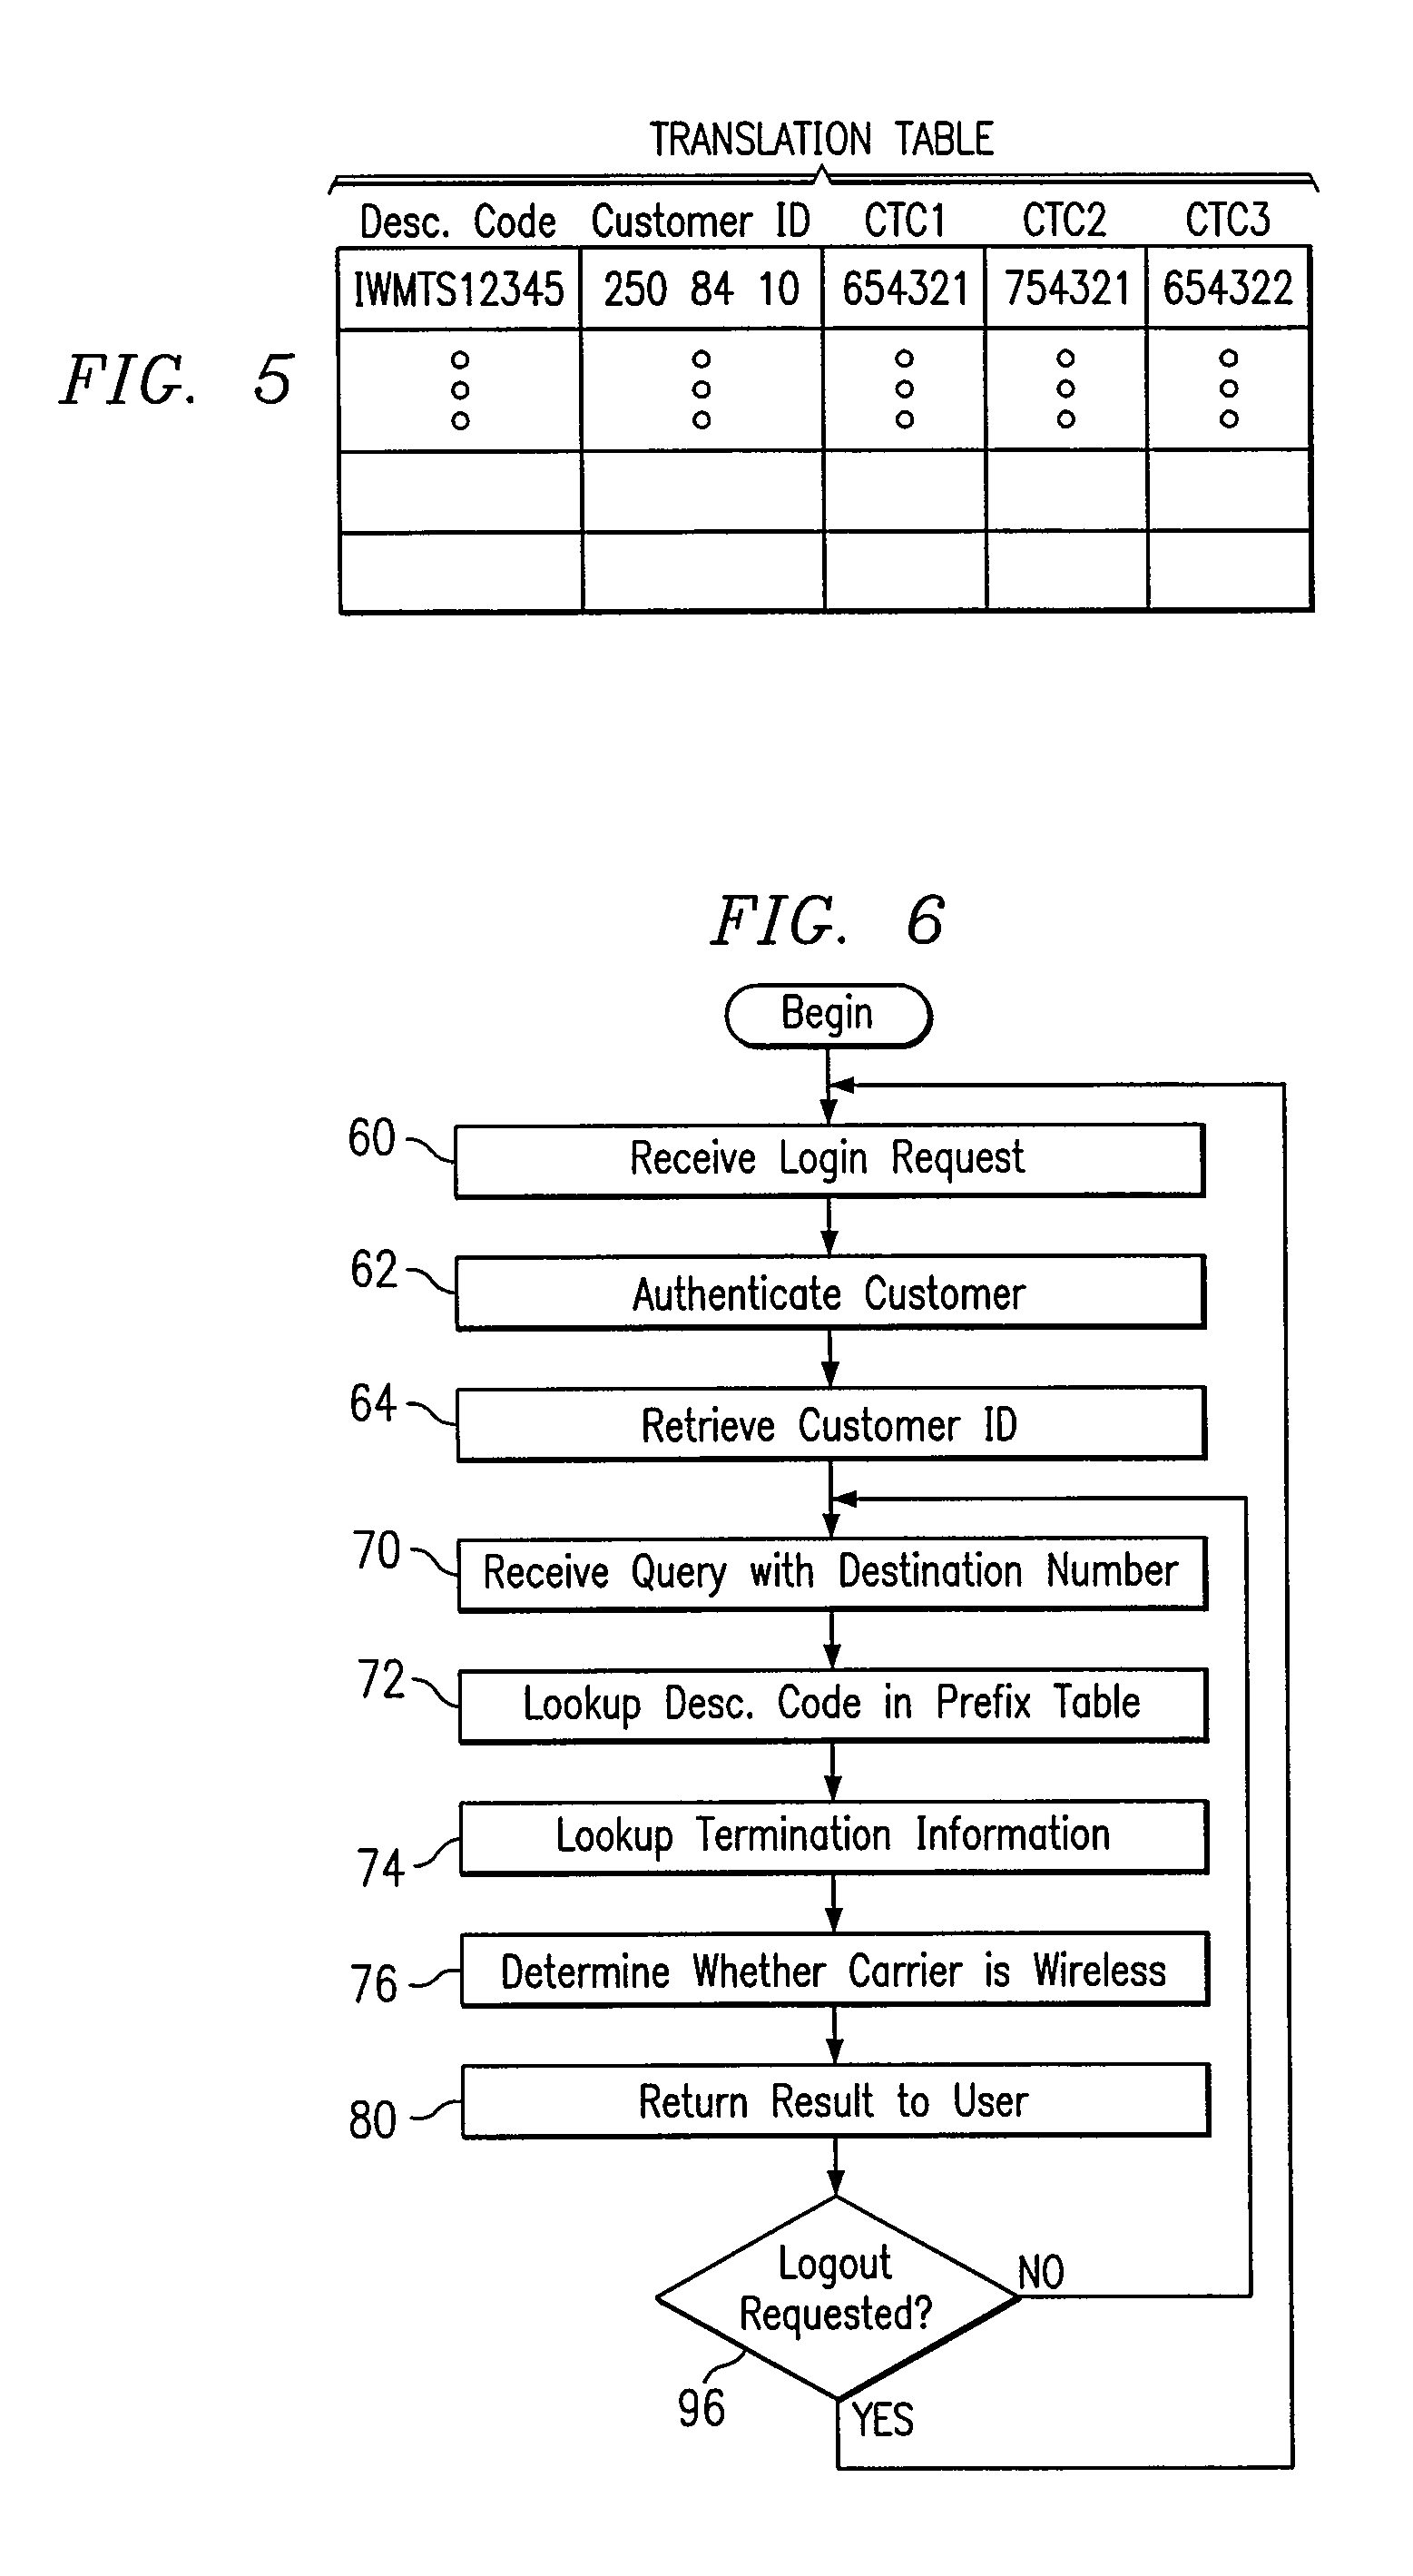 System and method for determining characteristics for international calls